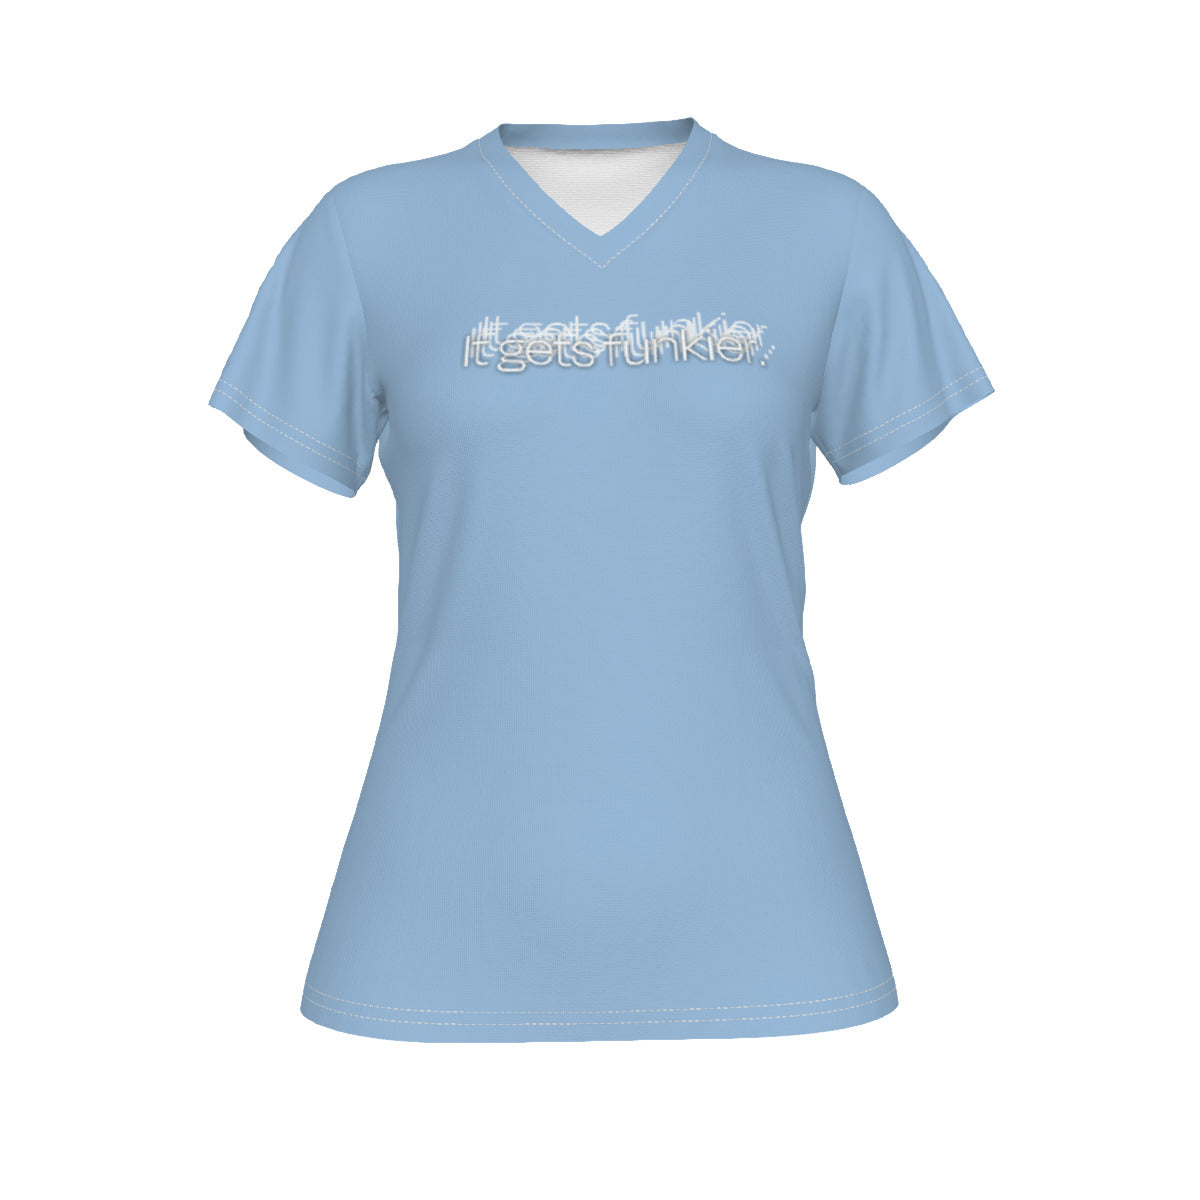 Vulfpeck VOSM Collection - It Gets Funkier - All-Over Print V-neck Women's T-shirt